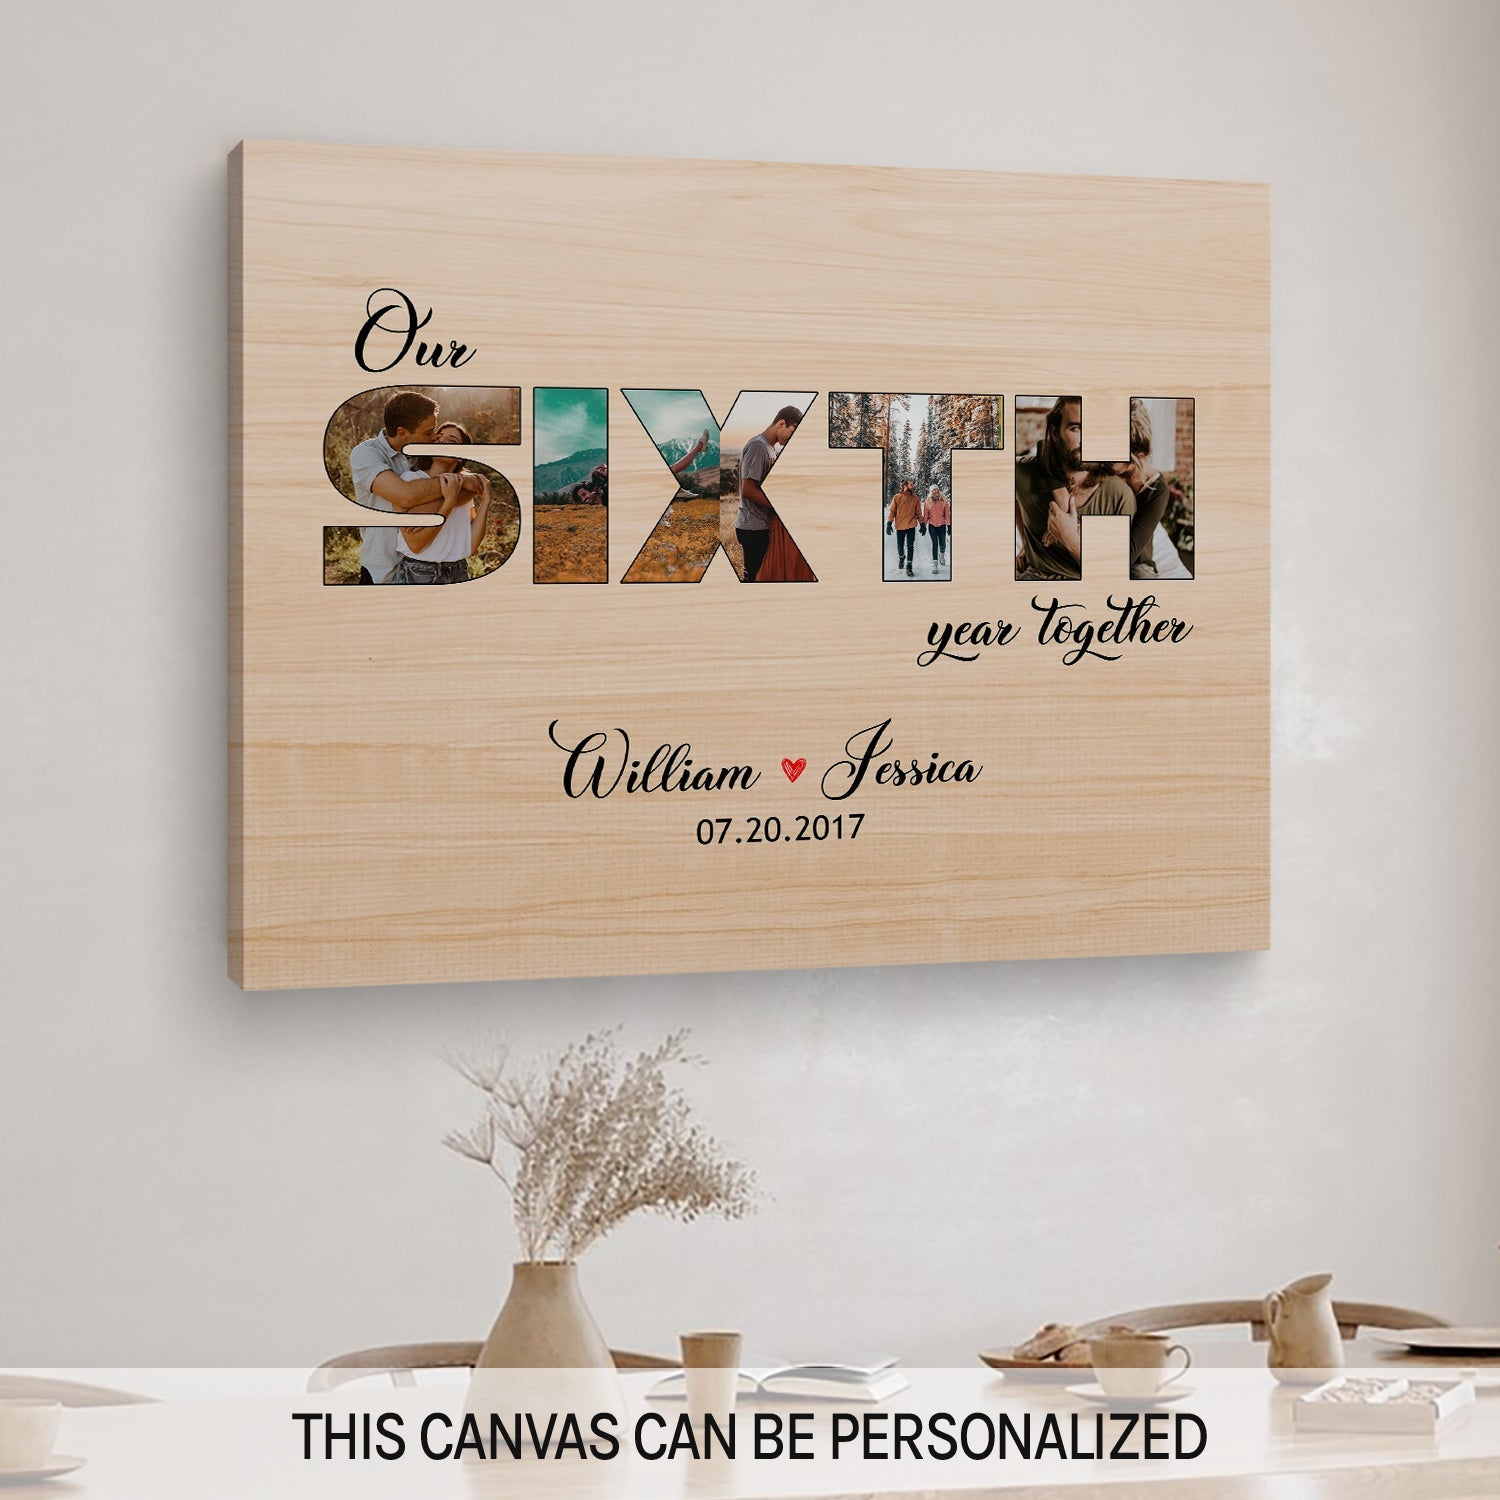 Our Sixth Year Together Photo Collage - Personalized 6 Year Anniversary gift for Husband or Wife - Custom Canvas Print - MyMindfulGifts